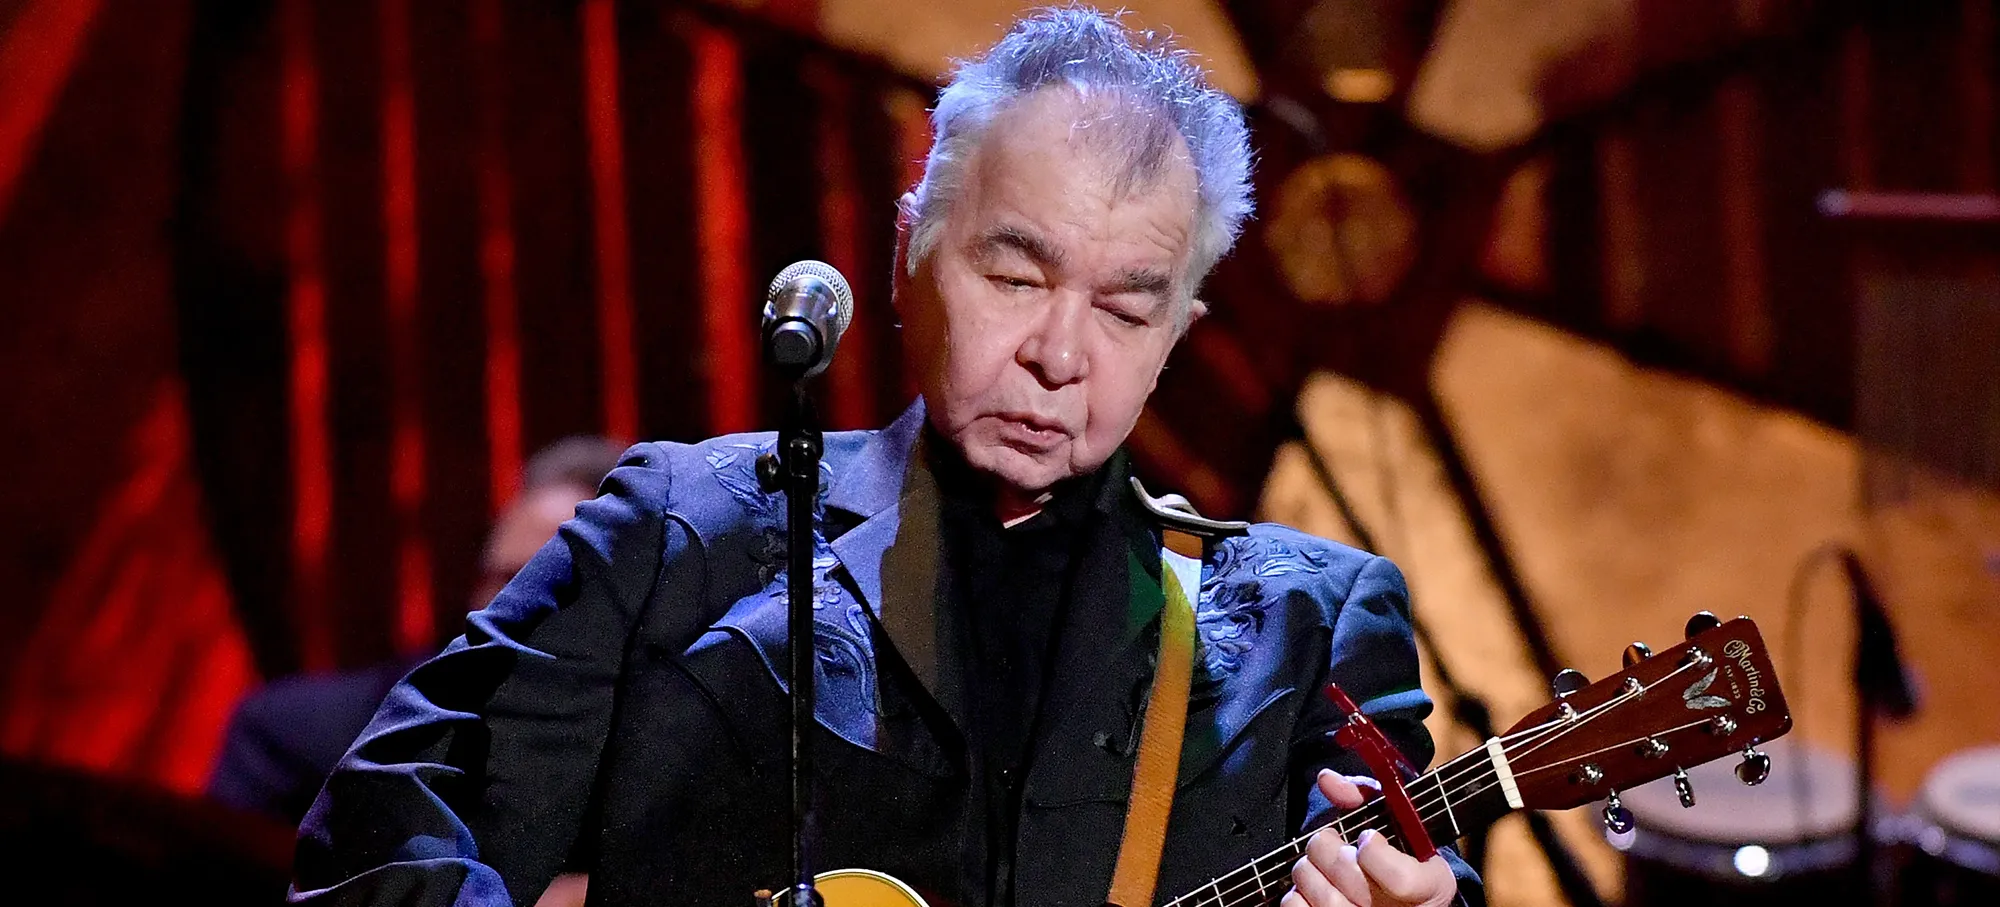 John Prine Family “Monitoring” COVID Situation and Impact on Upcoming 74th Celebration